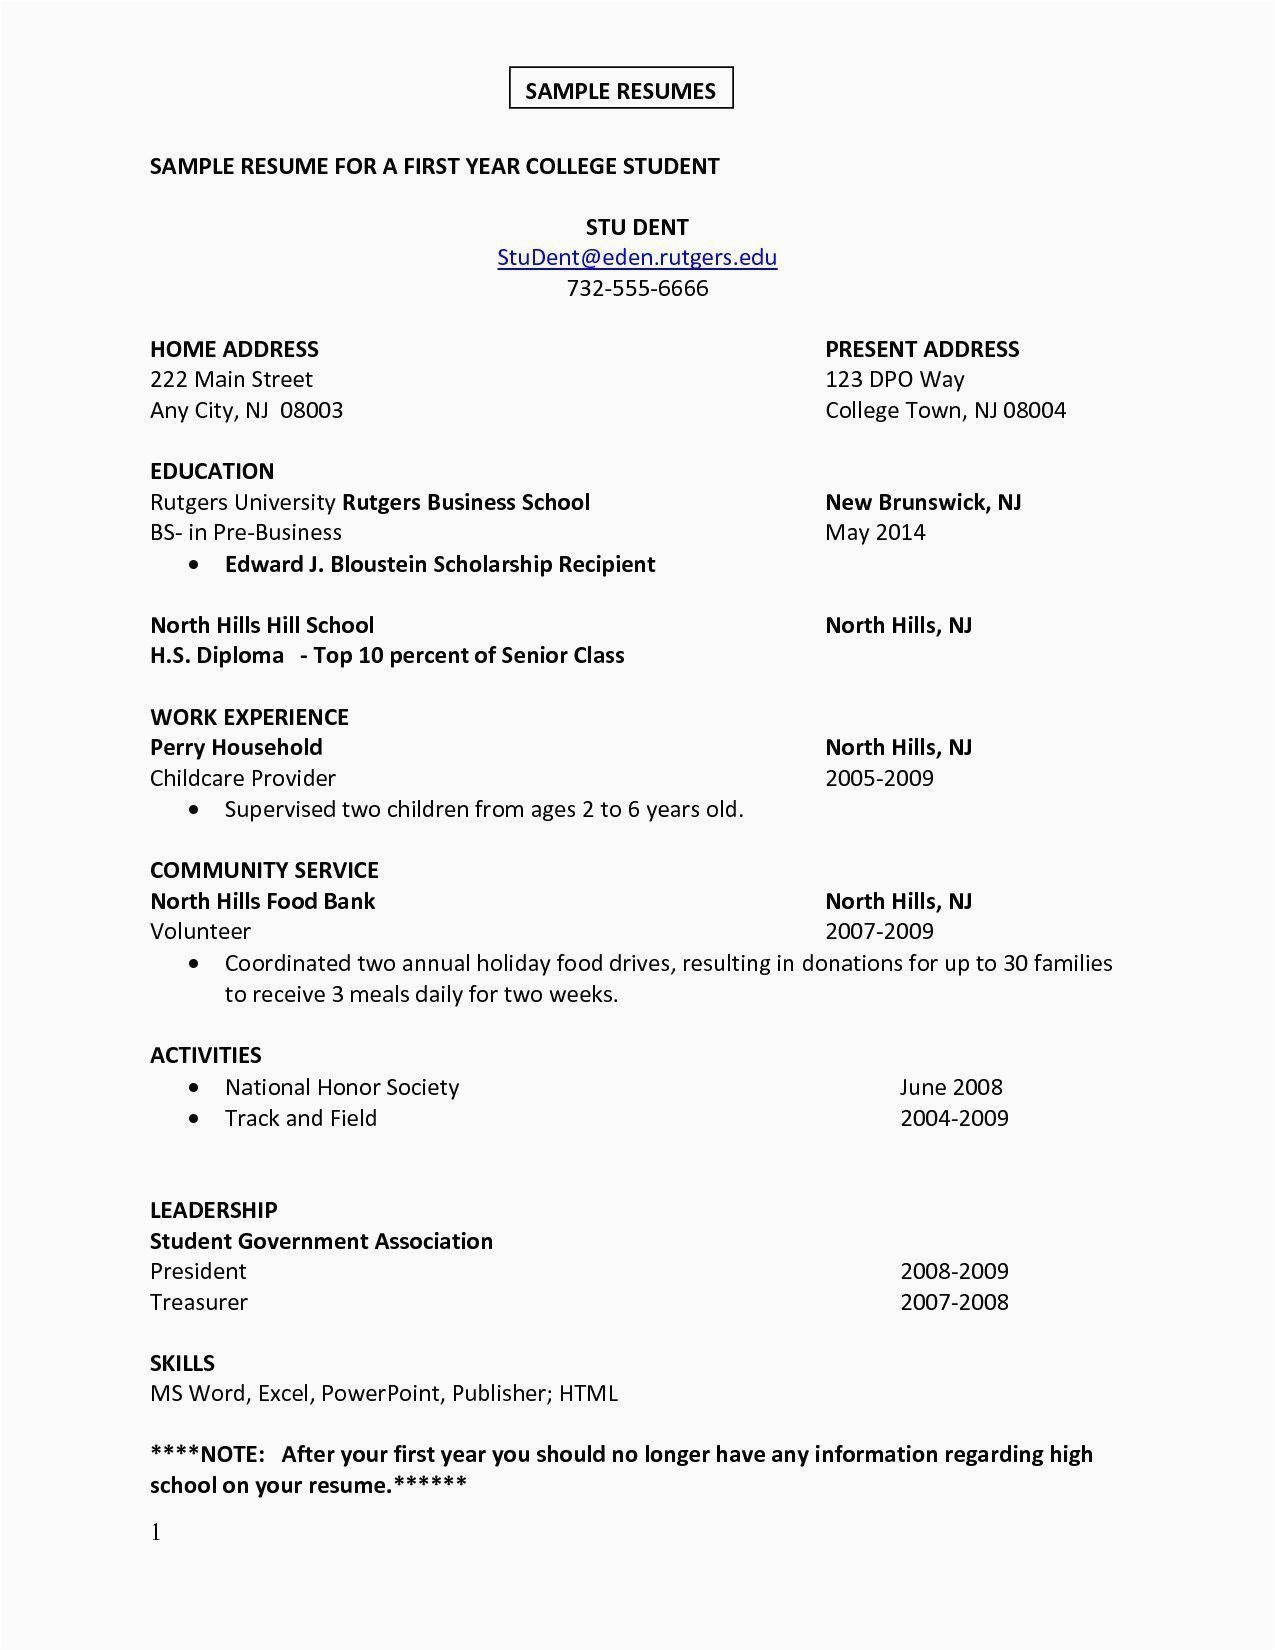 Sample First Time Resume for High School Student Resume for High School Student First Job original First